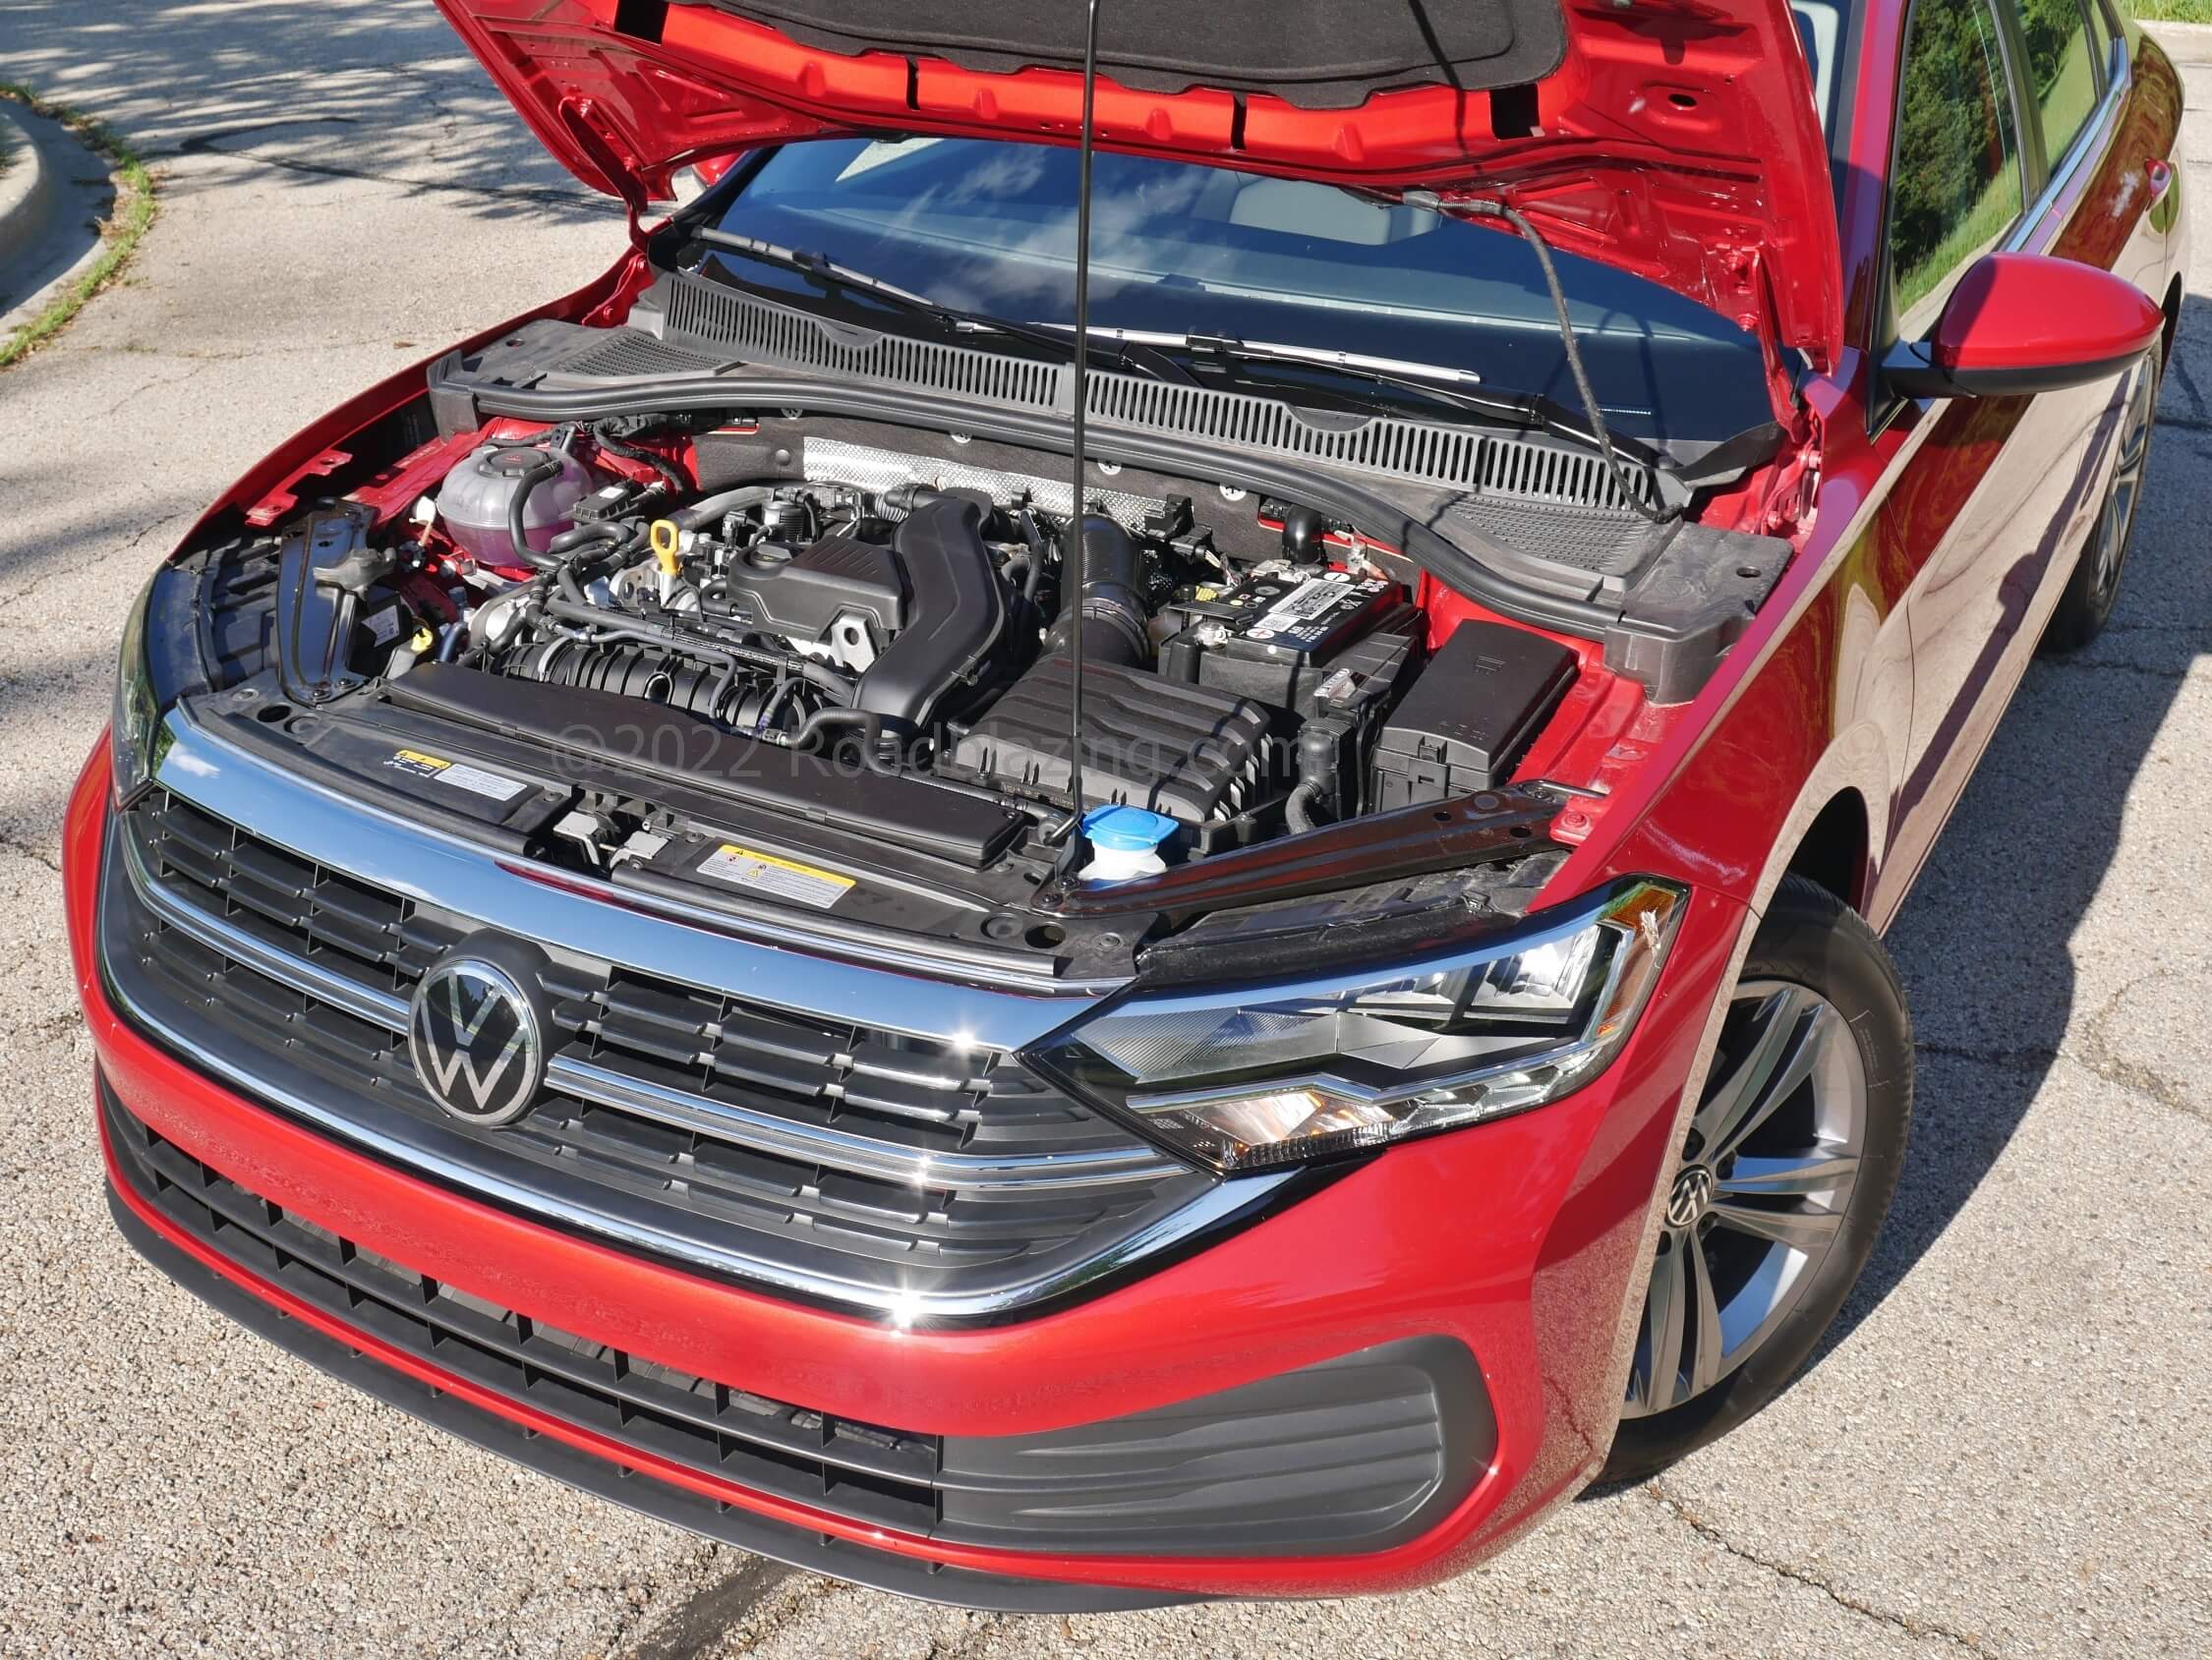 2022 Volkswagen Jetta 1.5T SE: 11 additional horsepower in 100 cc larger turbo gasoline engine gets pretty frisky + 34 MPG combined